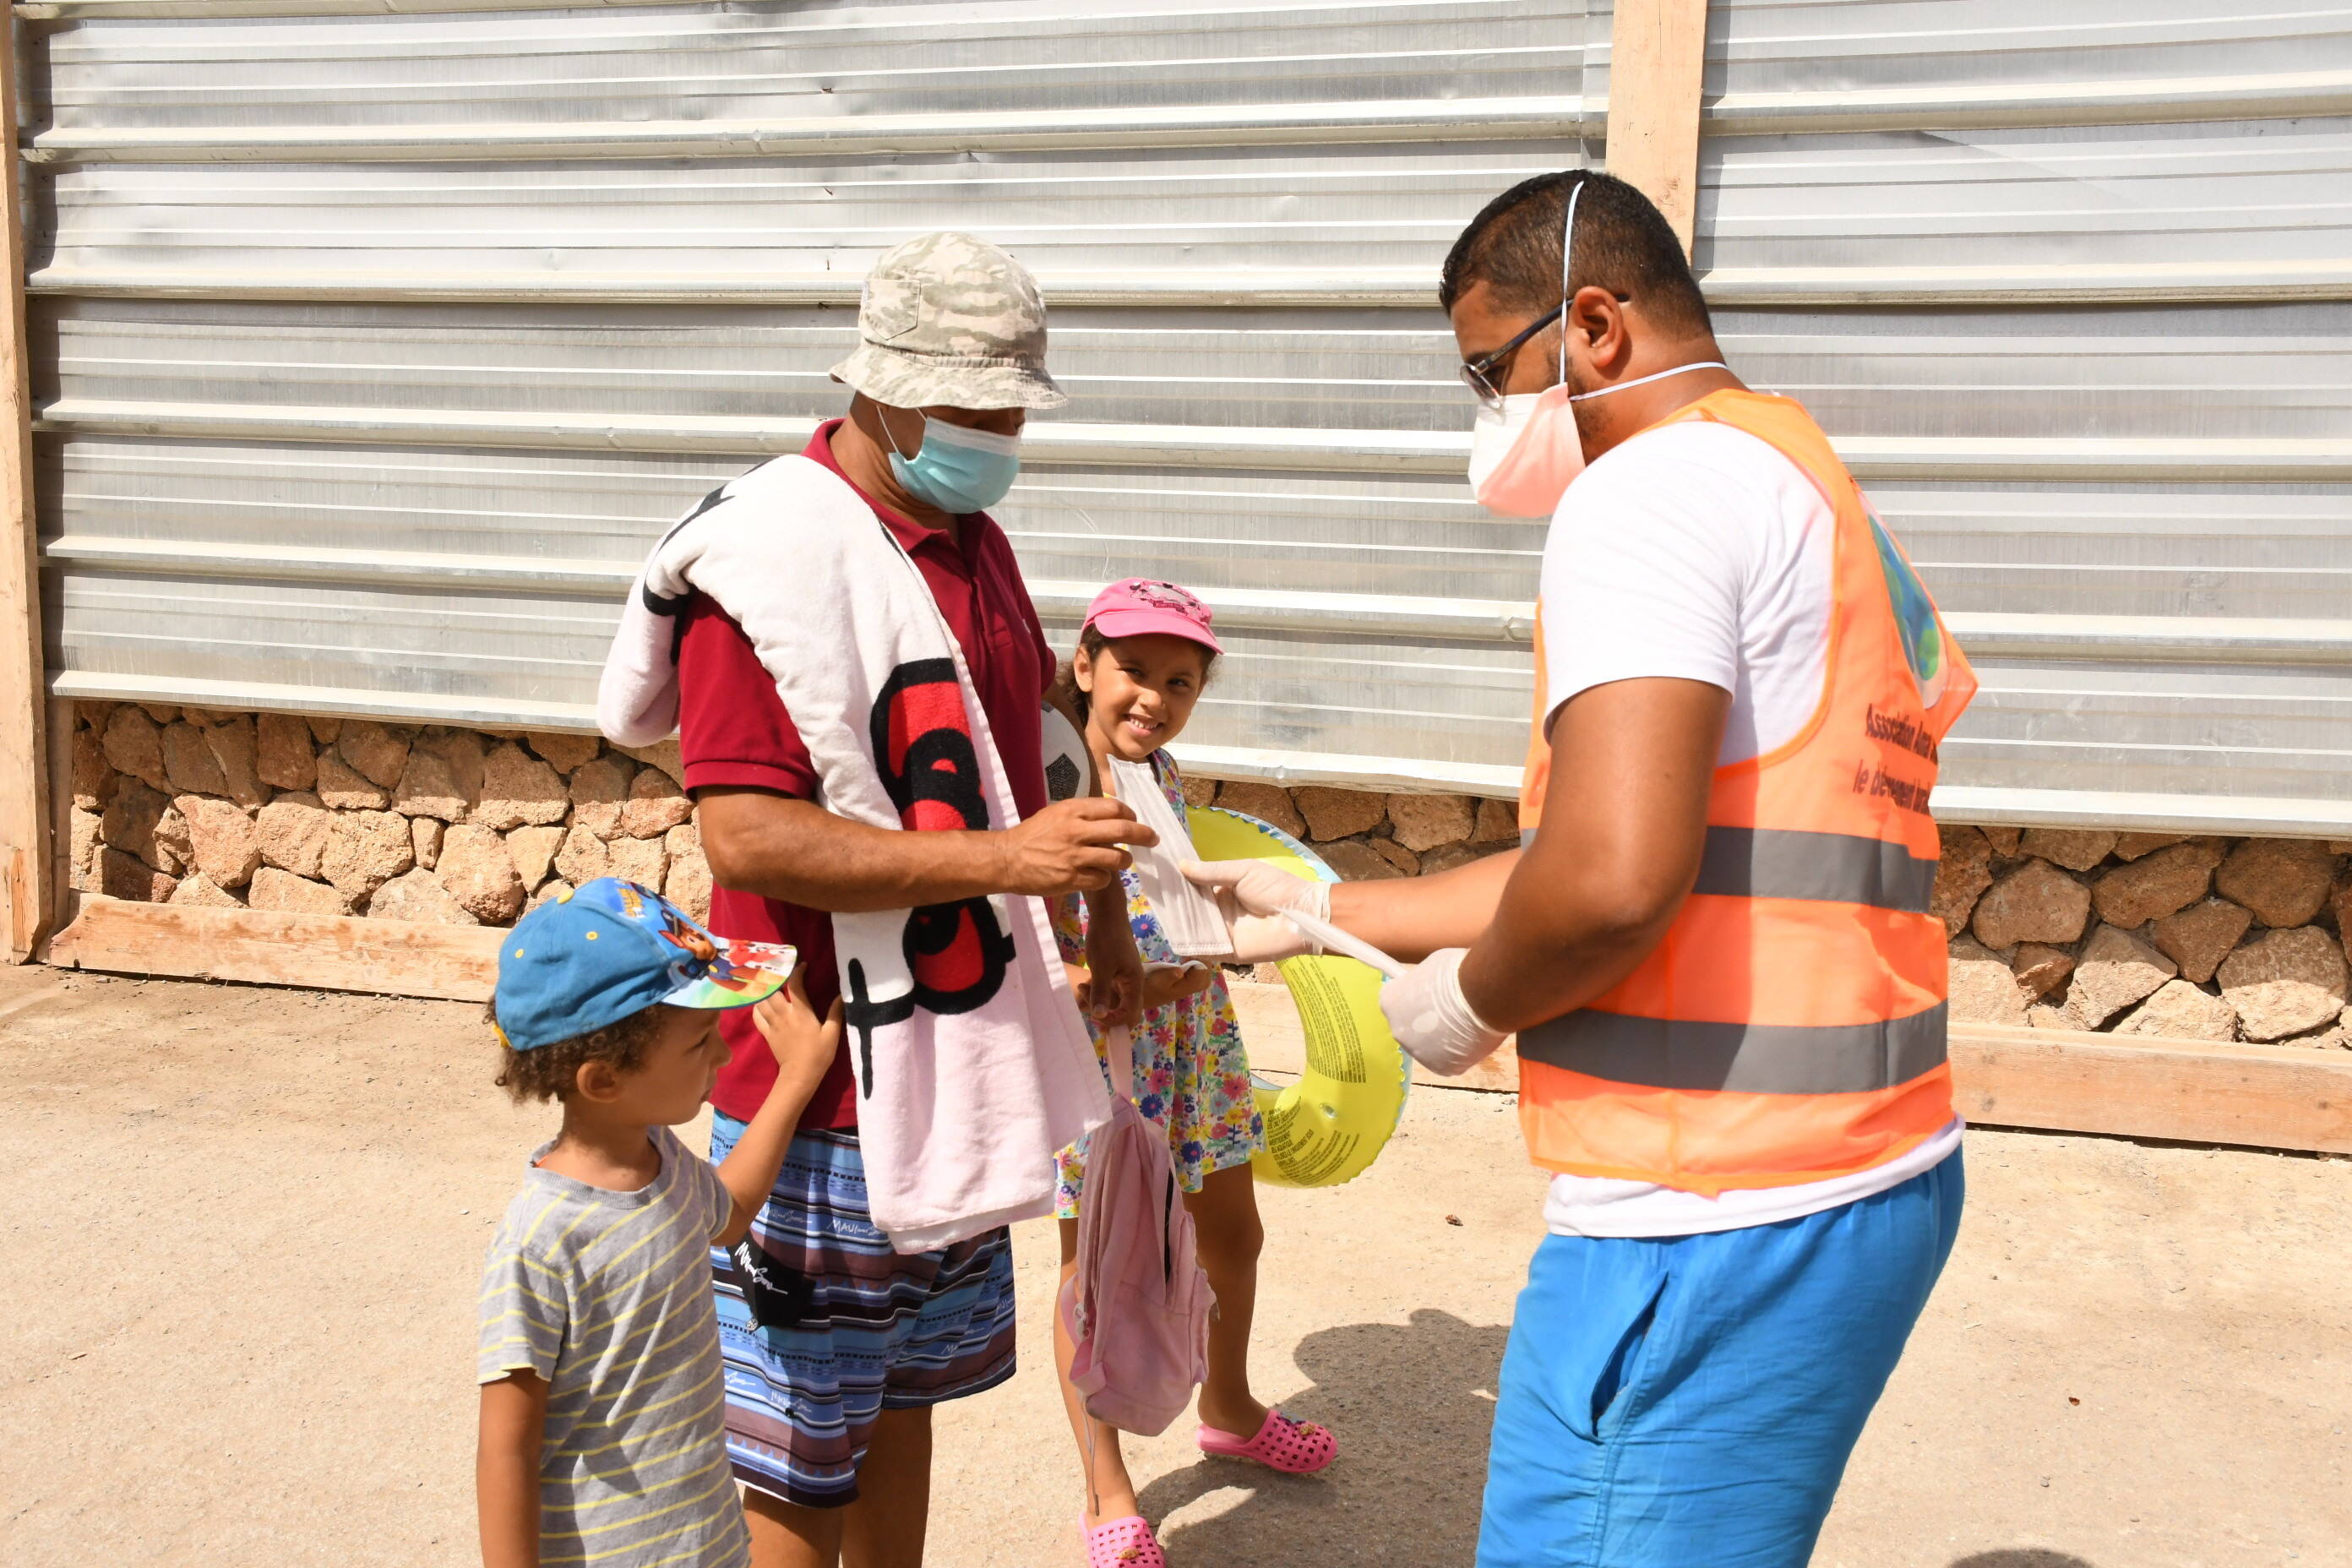 A health worker distributes a mask to a man on a beach in Rabat, Morocco, on 27 August 2020 (photo: imago images/Xinhua | Chadi via www.imago-images.de)